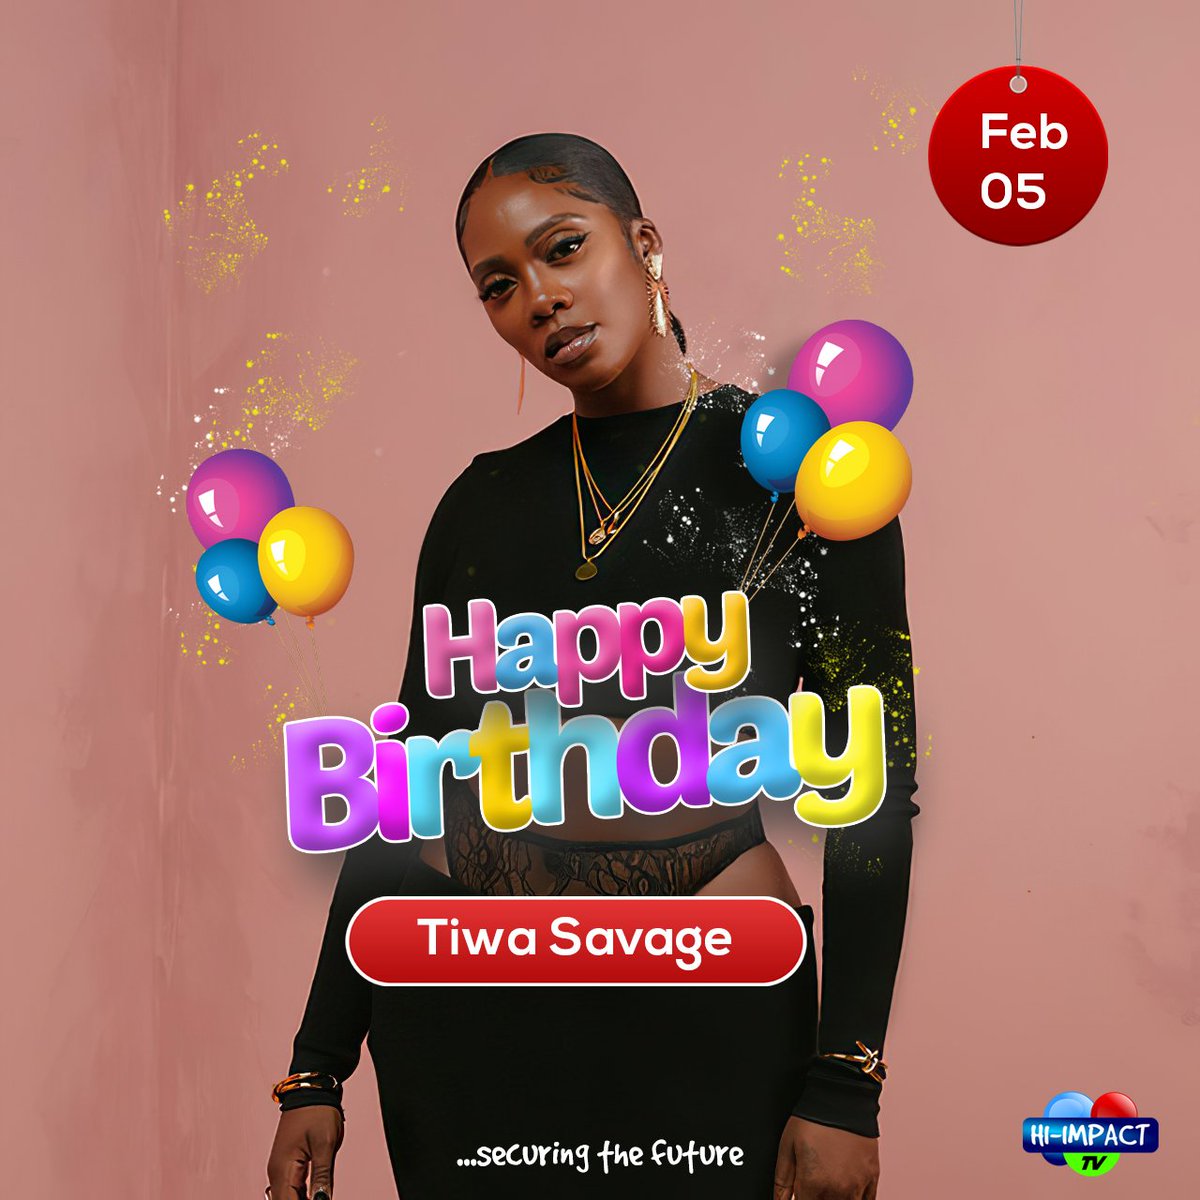 Happy birthday to the lady with the golden voice and one of the greatest musical icons to ever come out of Nigeria, @TiwaSavage 🎊🎉🎊

We hope this birthday as special as you are. Enjoy your day.✨💯

With love, from all of us at hiimpacttv💓💞

#tiwasavage #celebritybirthday